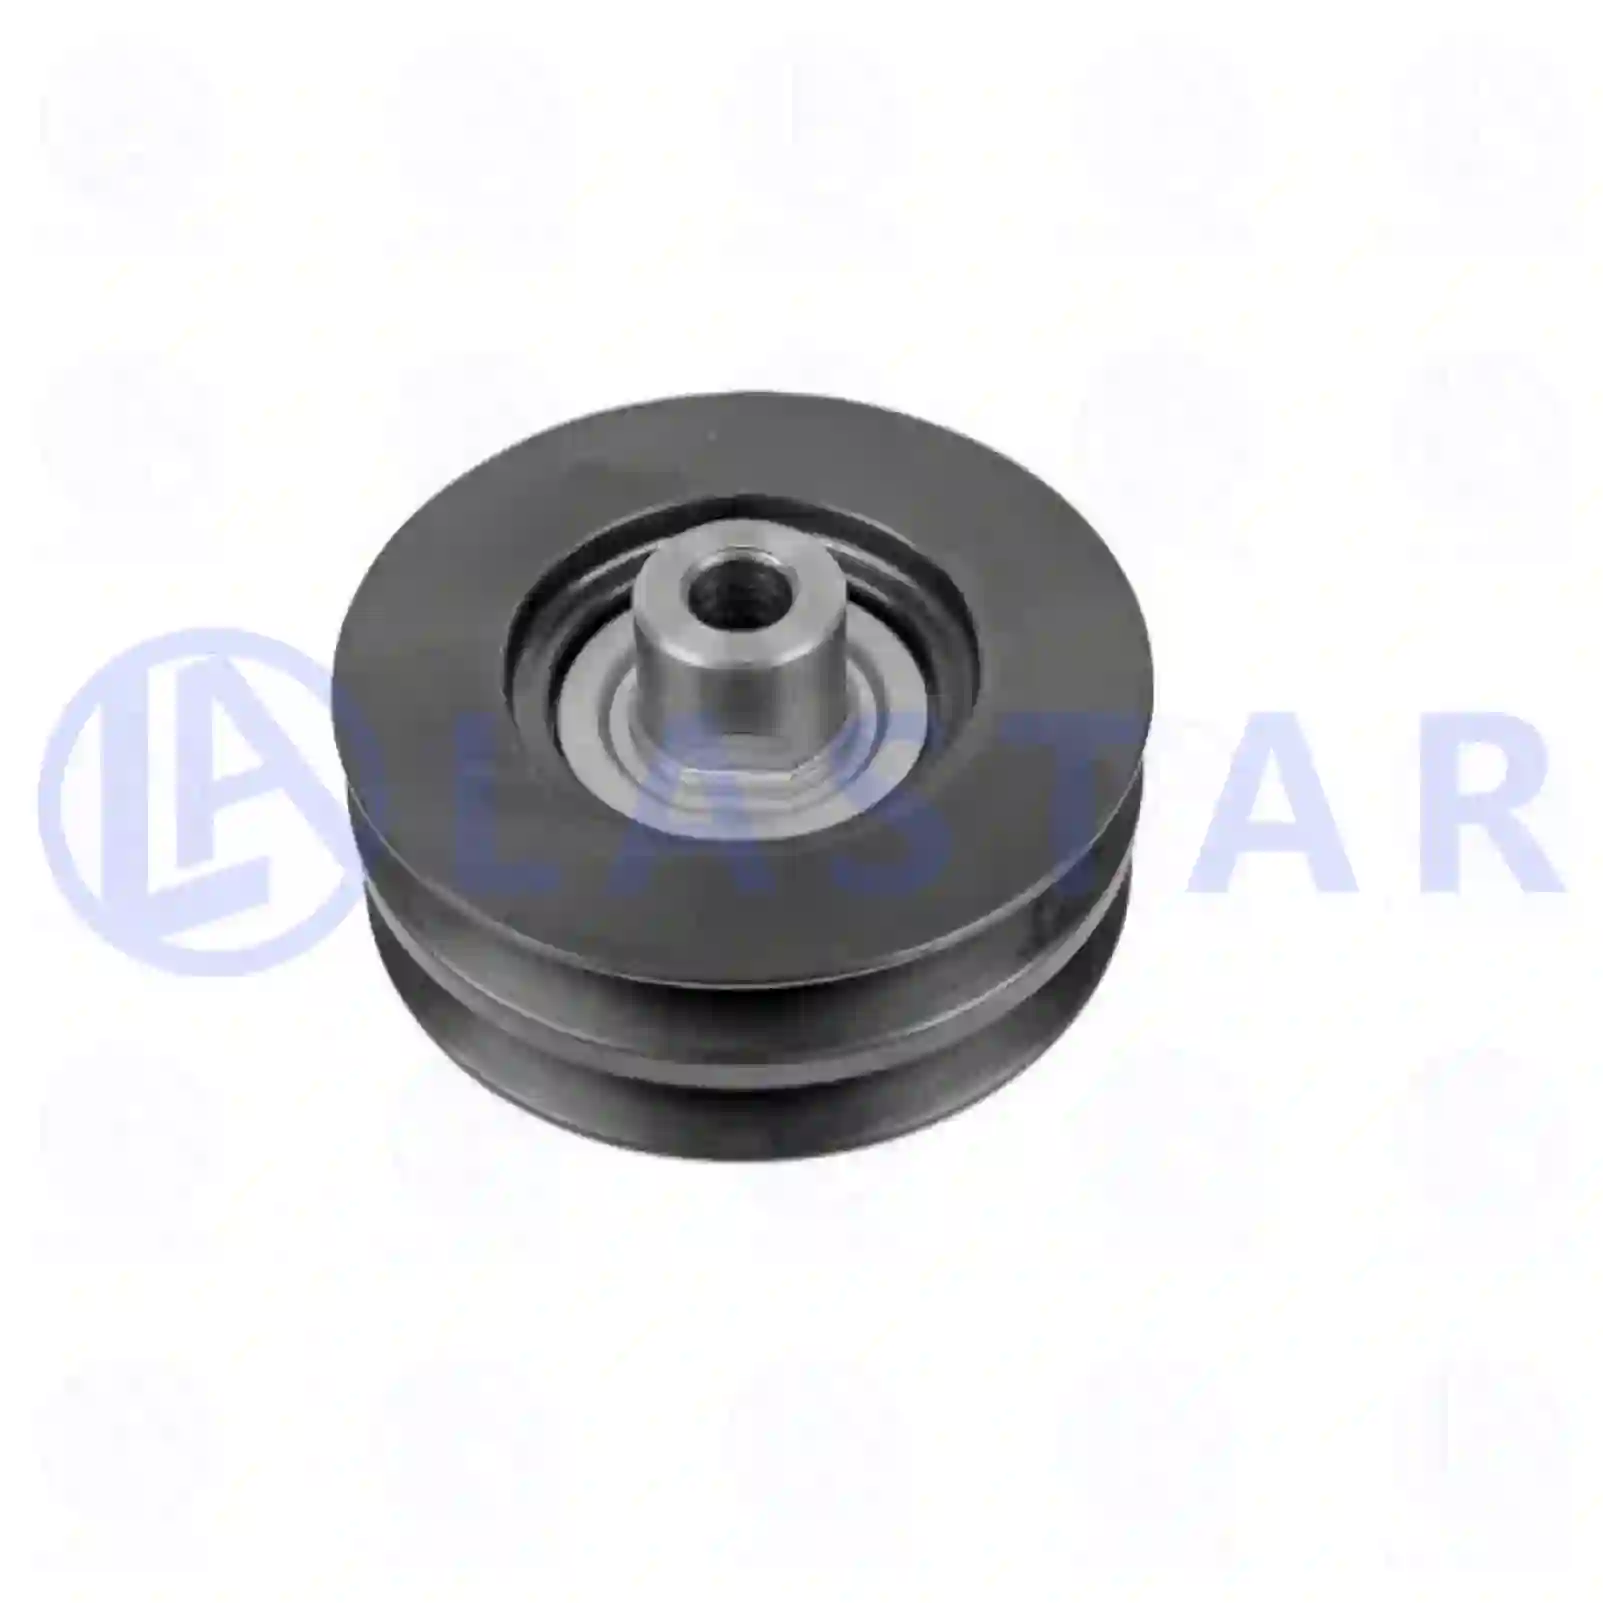 Pulley, 77708480, 1423354, 1439959, 1515125, 515125, ZG01910-0008 ||  77708480 Lastar Spare Part | Truck Spare Parts, Auotomotive Spare Parts Pulley, 77708480, 1423354, 1439959, 1515125, 515125, ZG01910-0008 ||  77708480 Lastar Spare Part | Truck Spare Parts, Auotomotive Spare Parts